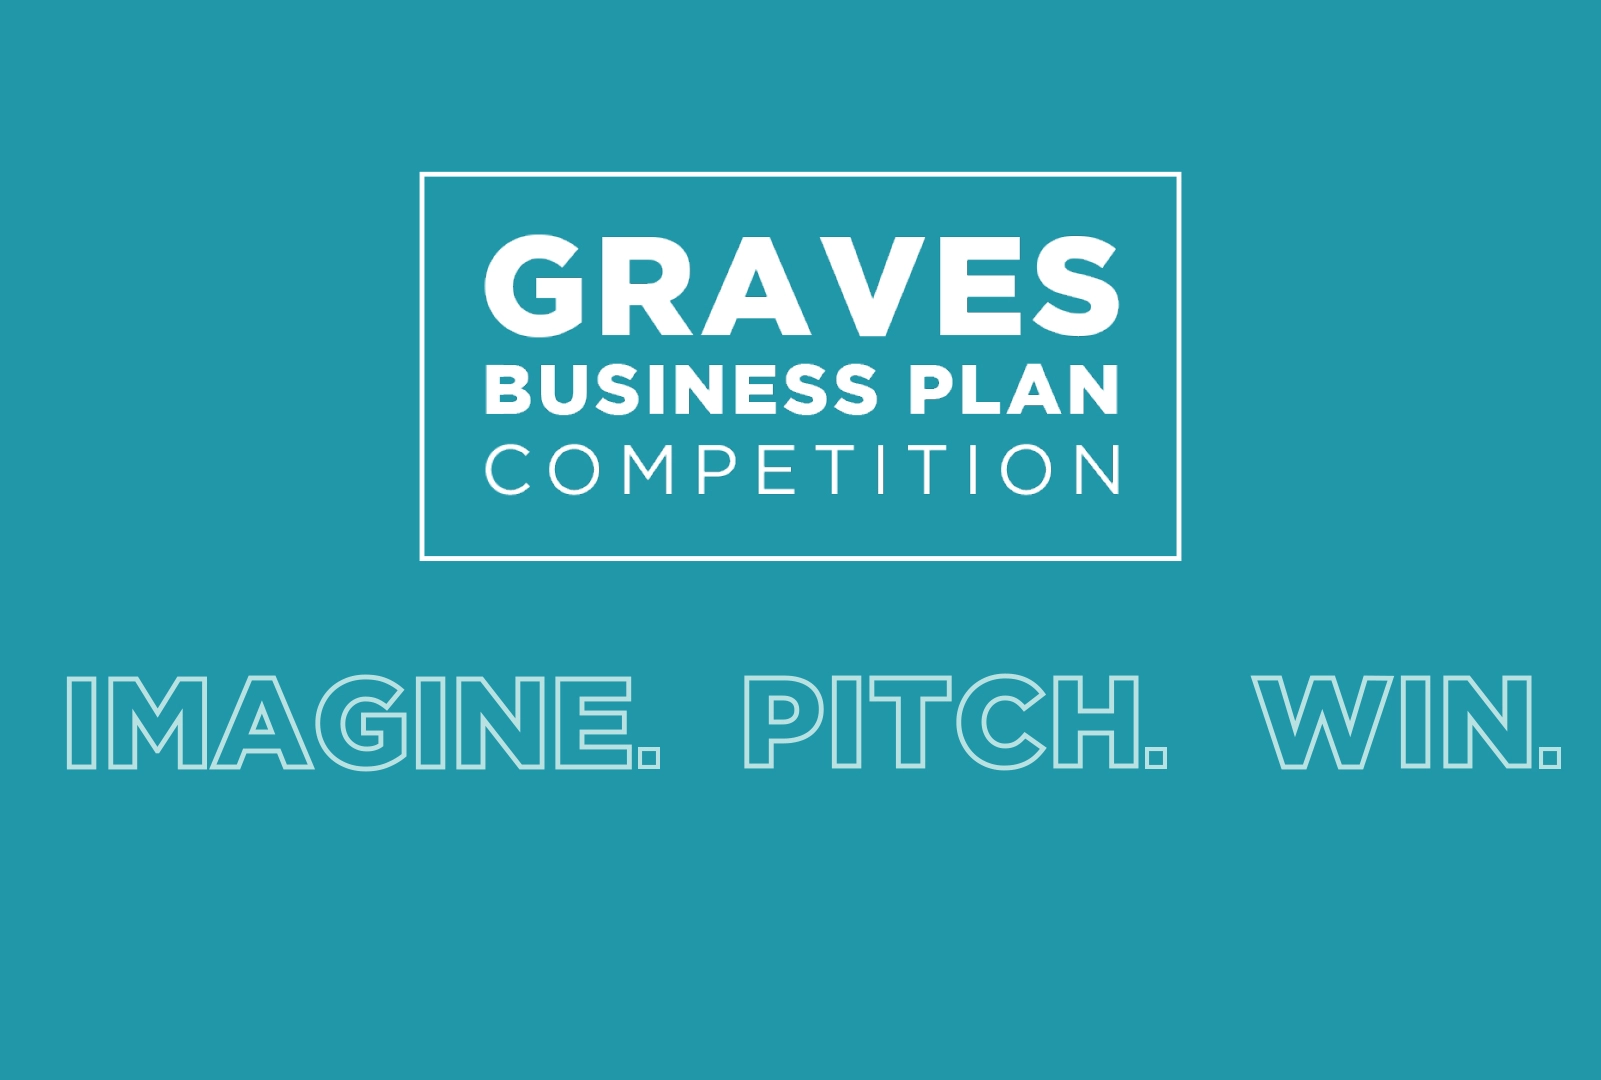 Graves Business Plan Competition - Imagine. Pitch. Win.